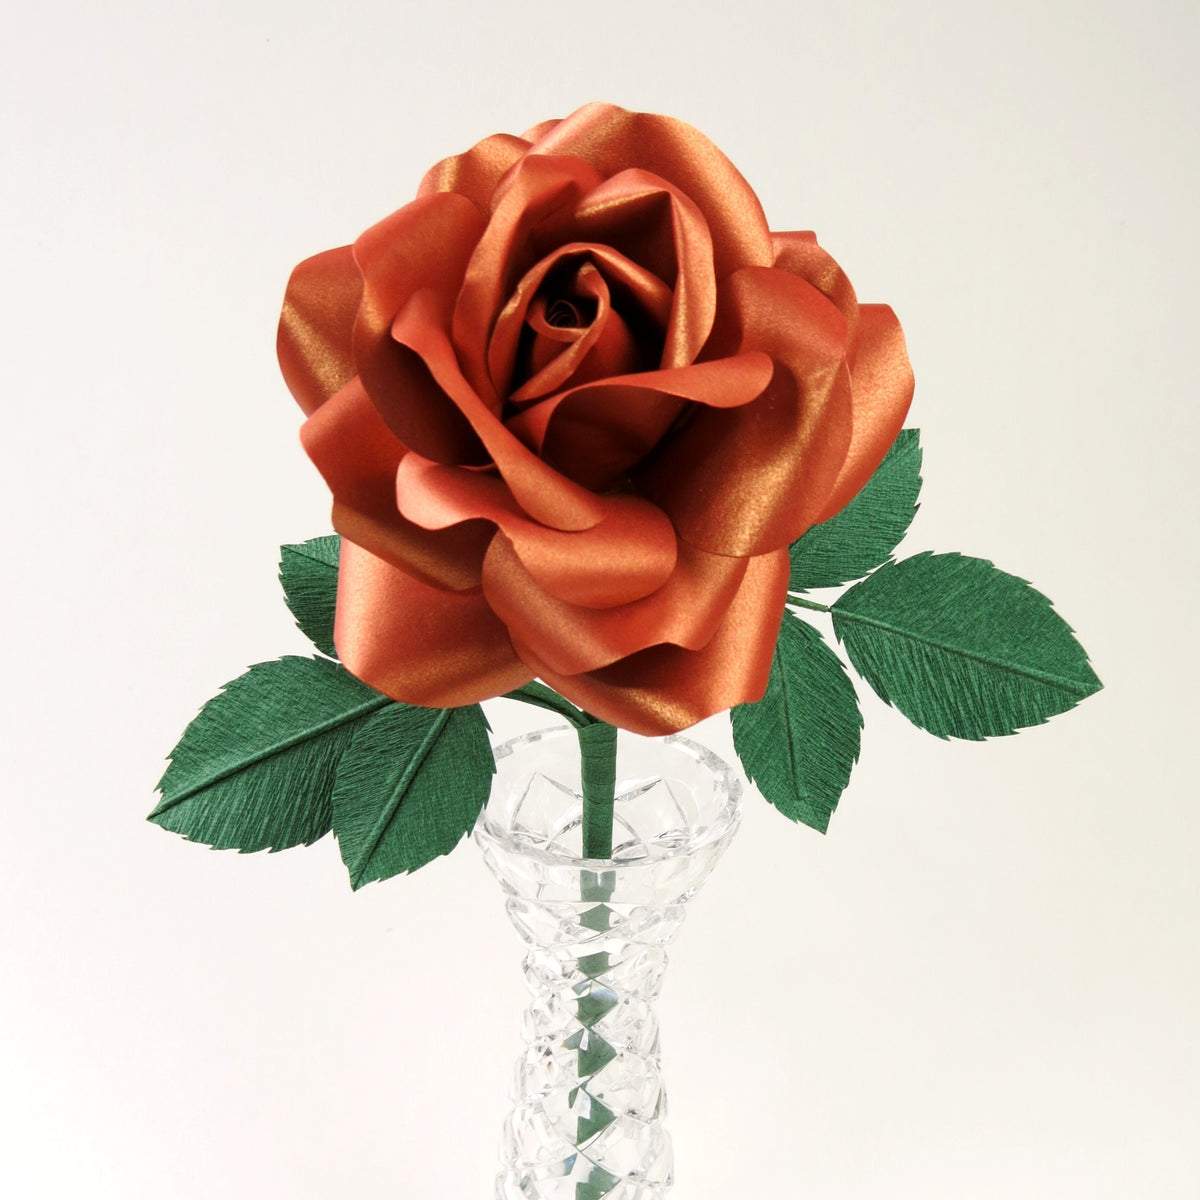 Copper paper rose with six green leaves standing in a narrow glass vase set against a light grey background